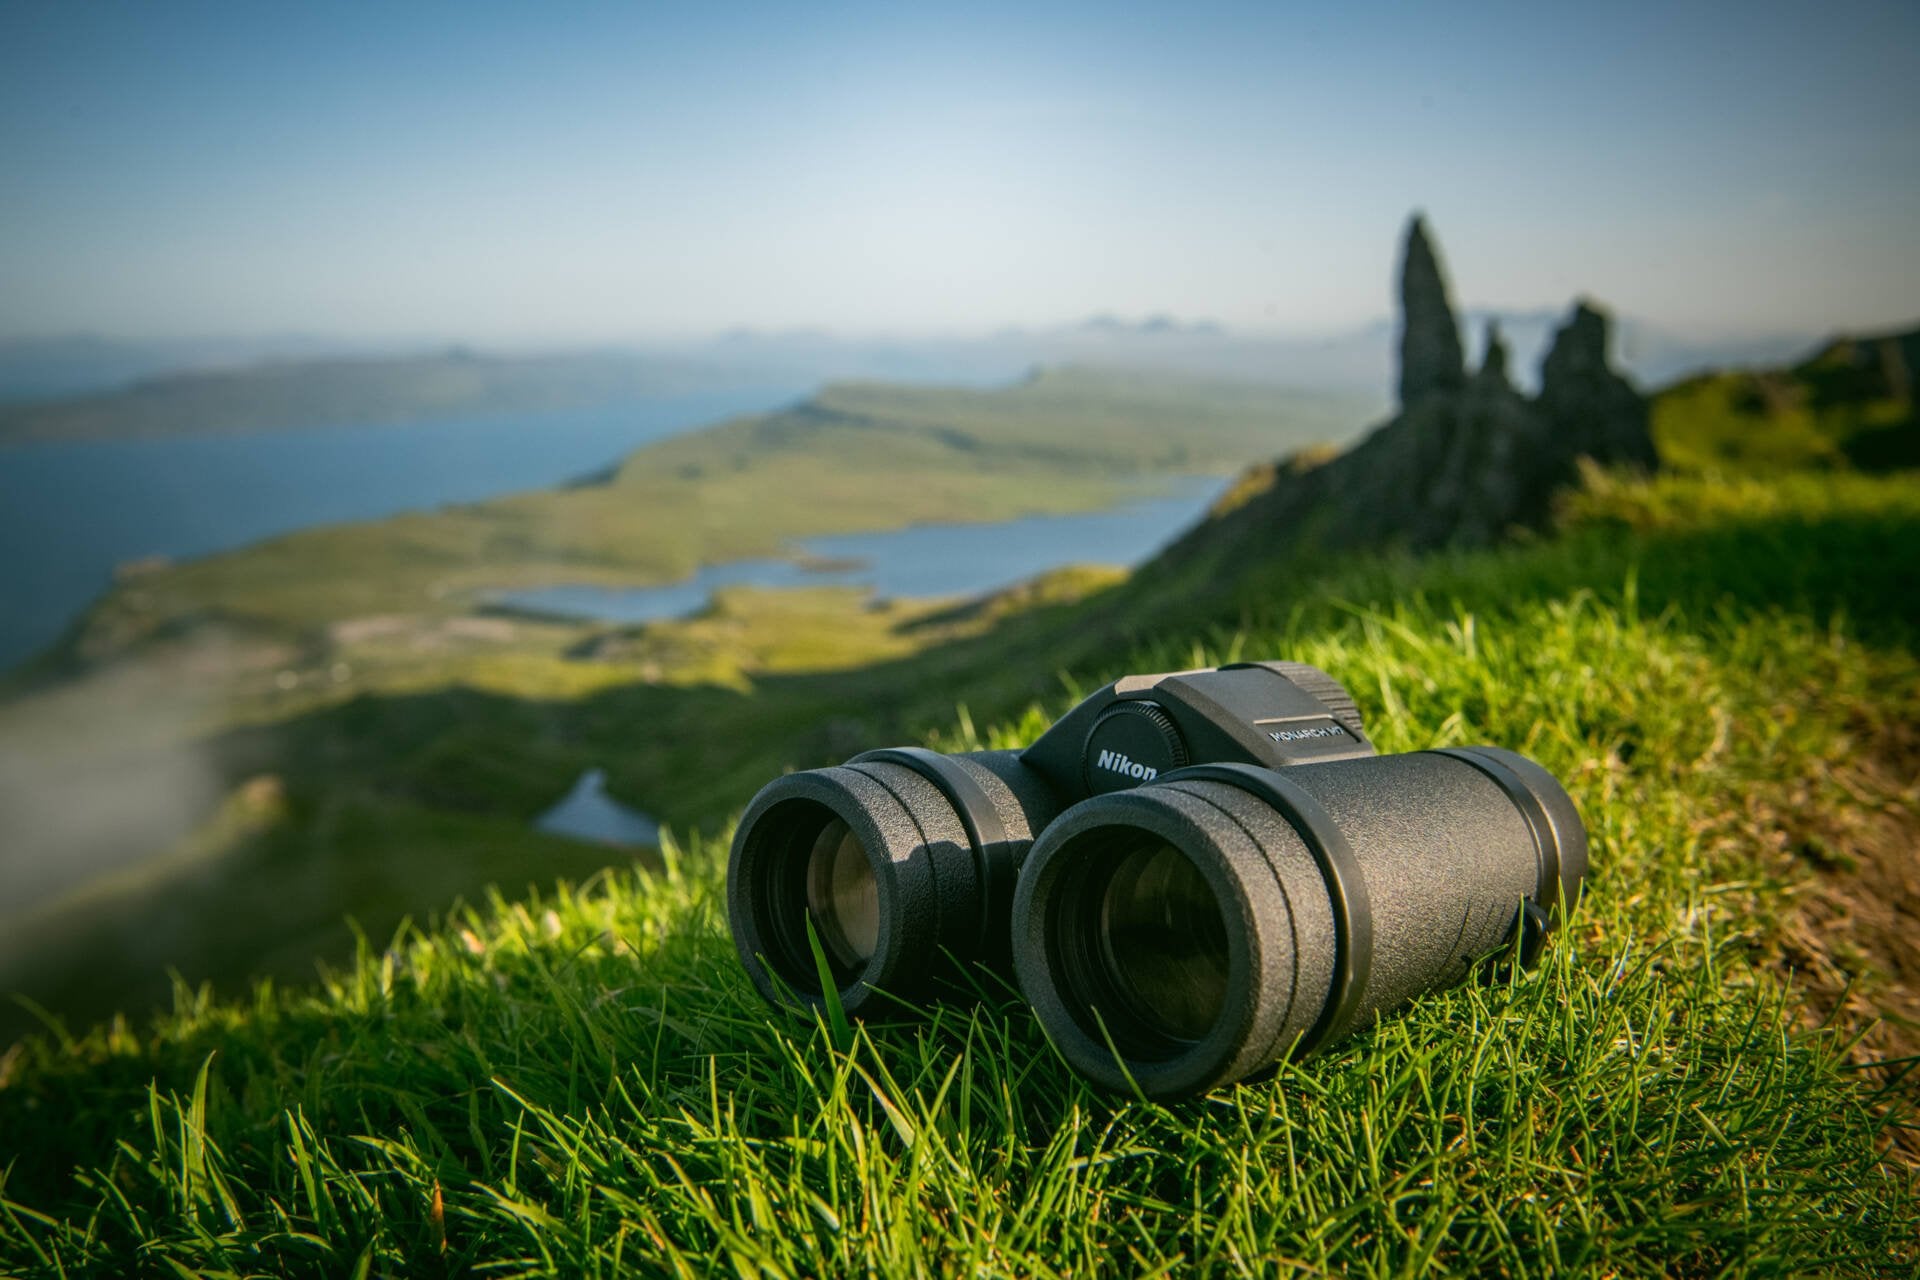 Photo of the binoculars lying on the grass in a mountainous region